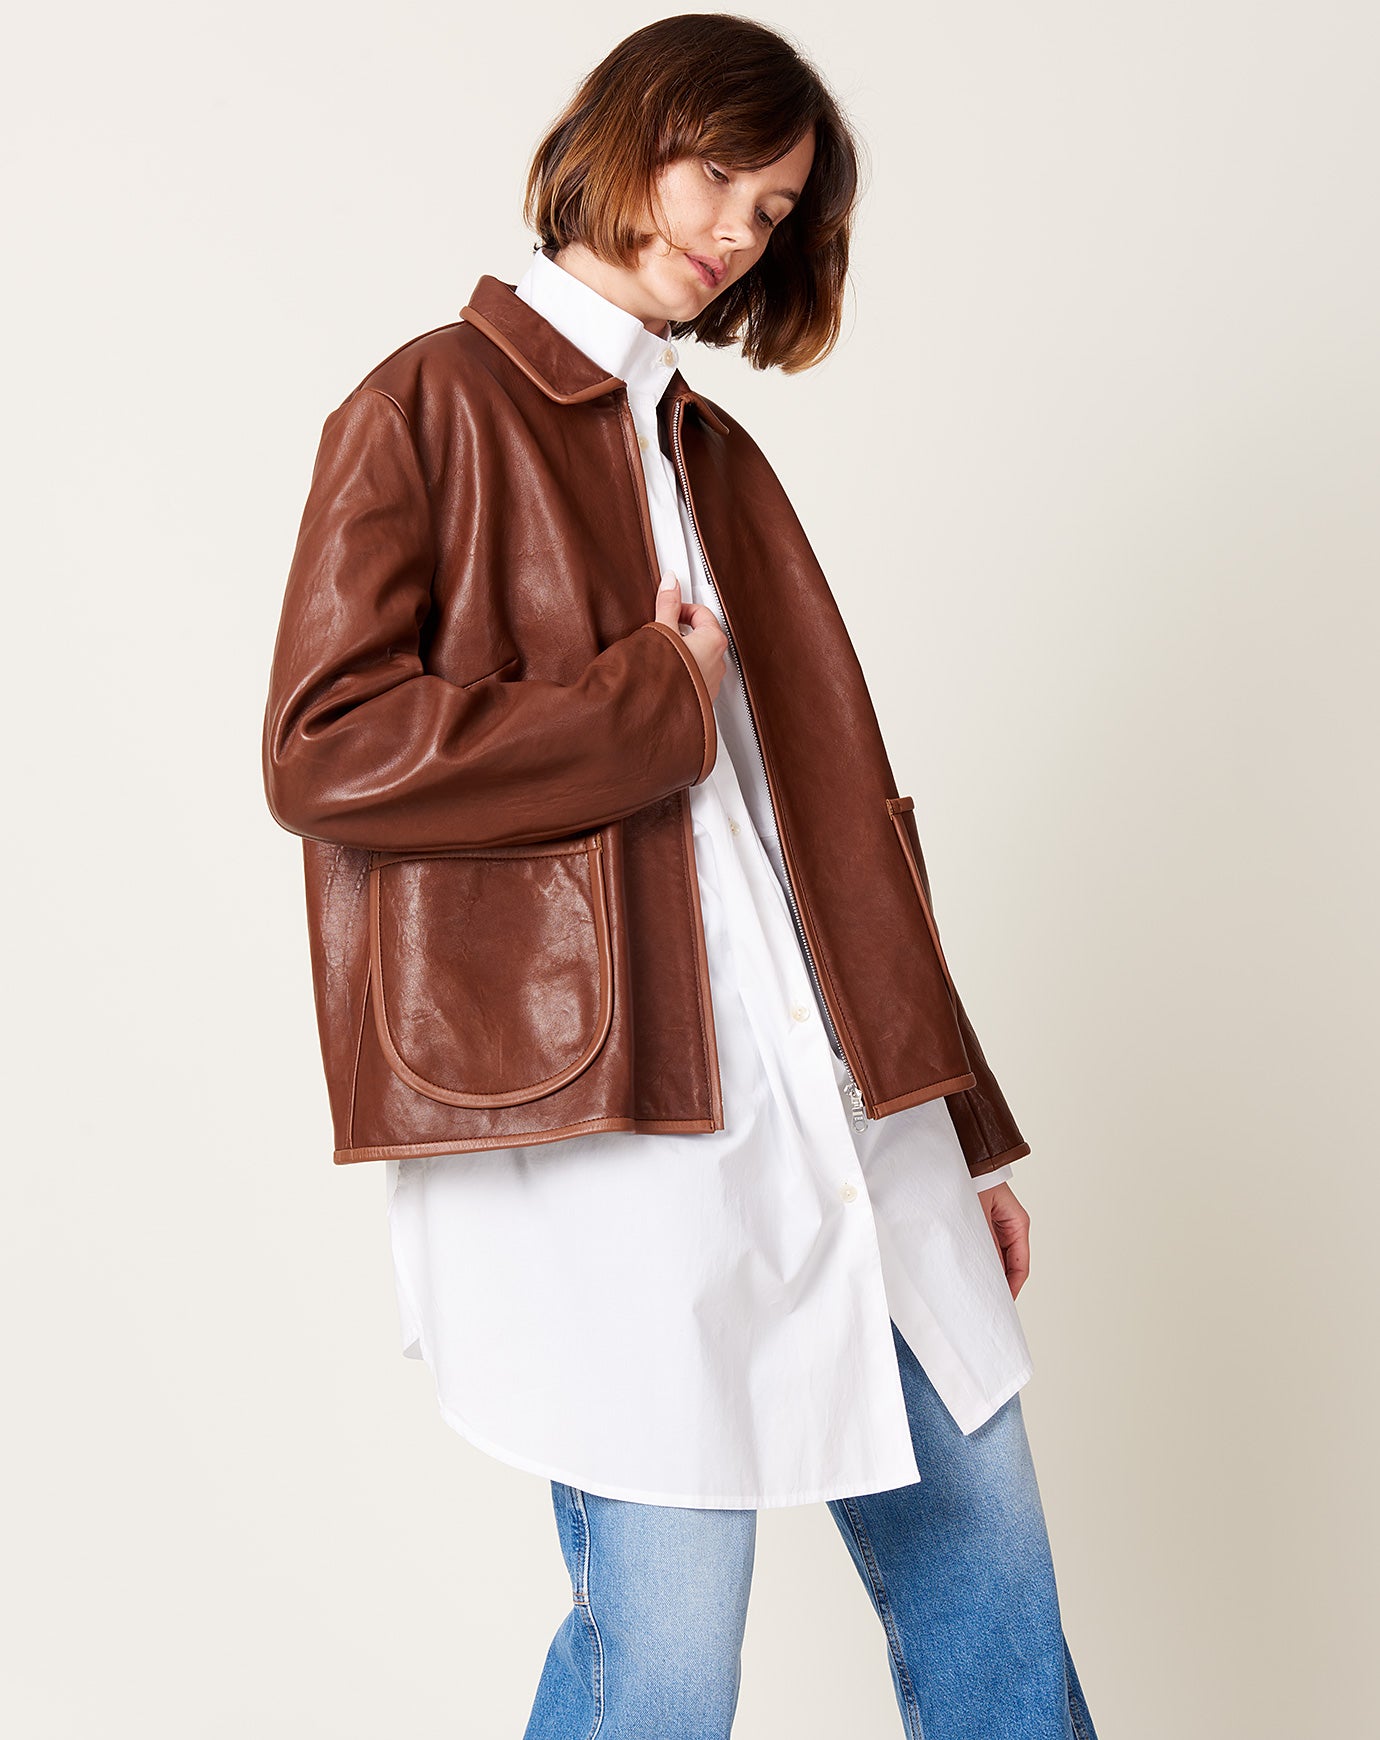 Cawley Leather Zip Lillie Jacket in Light Brown